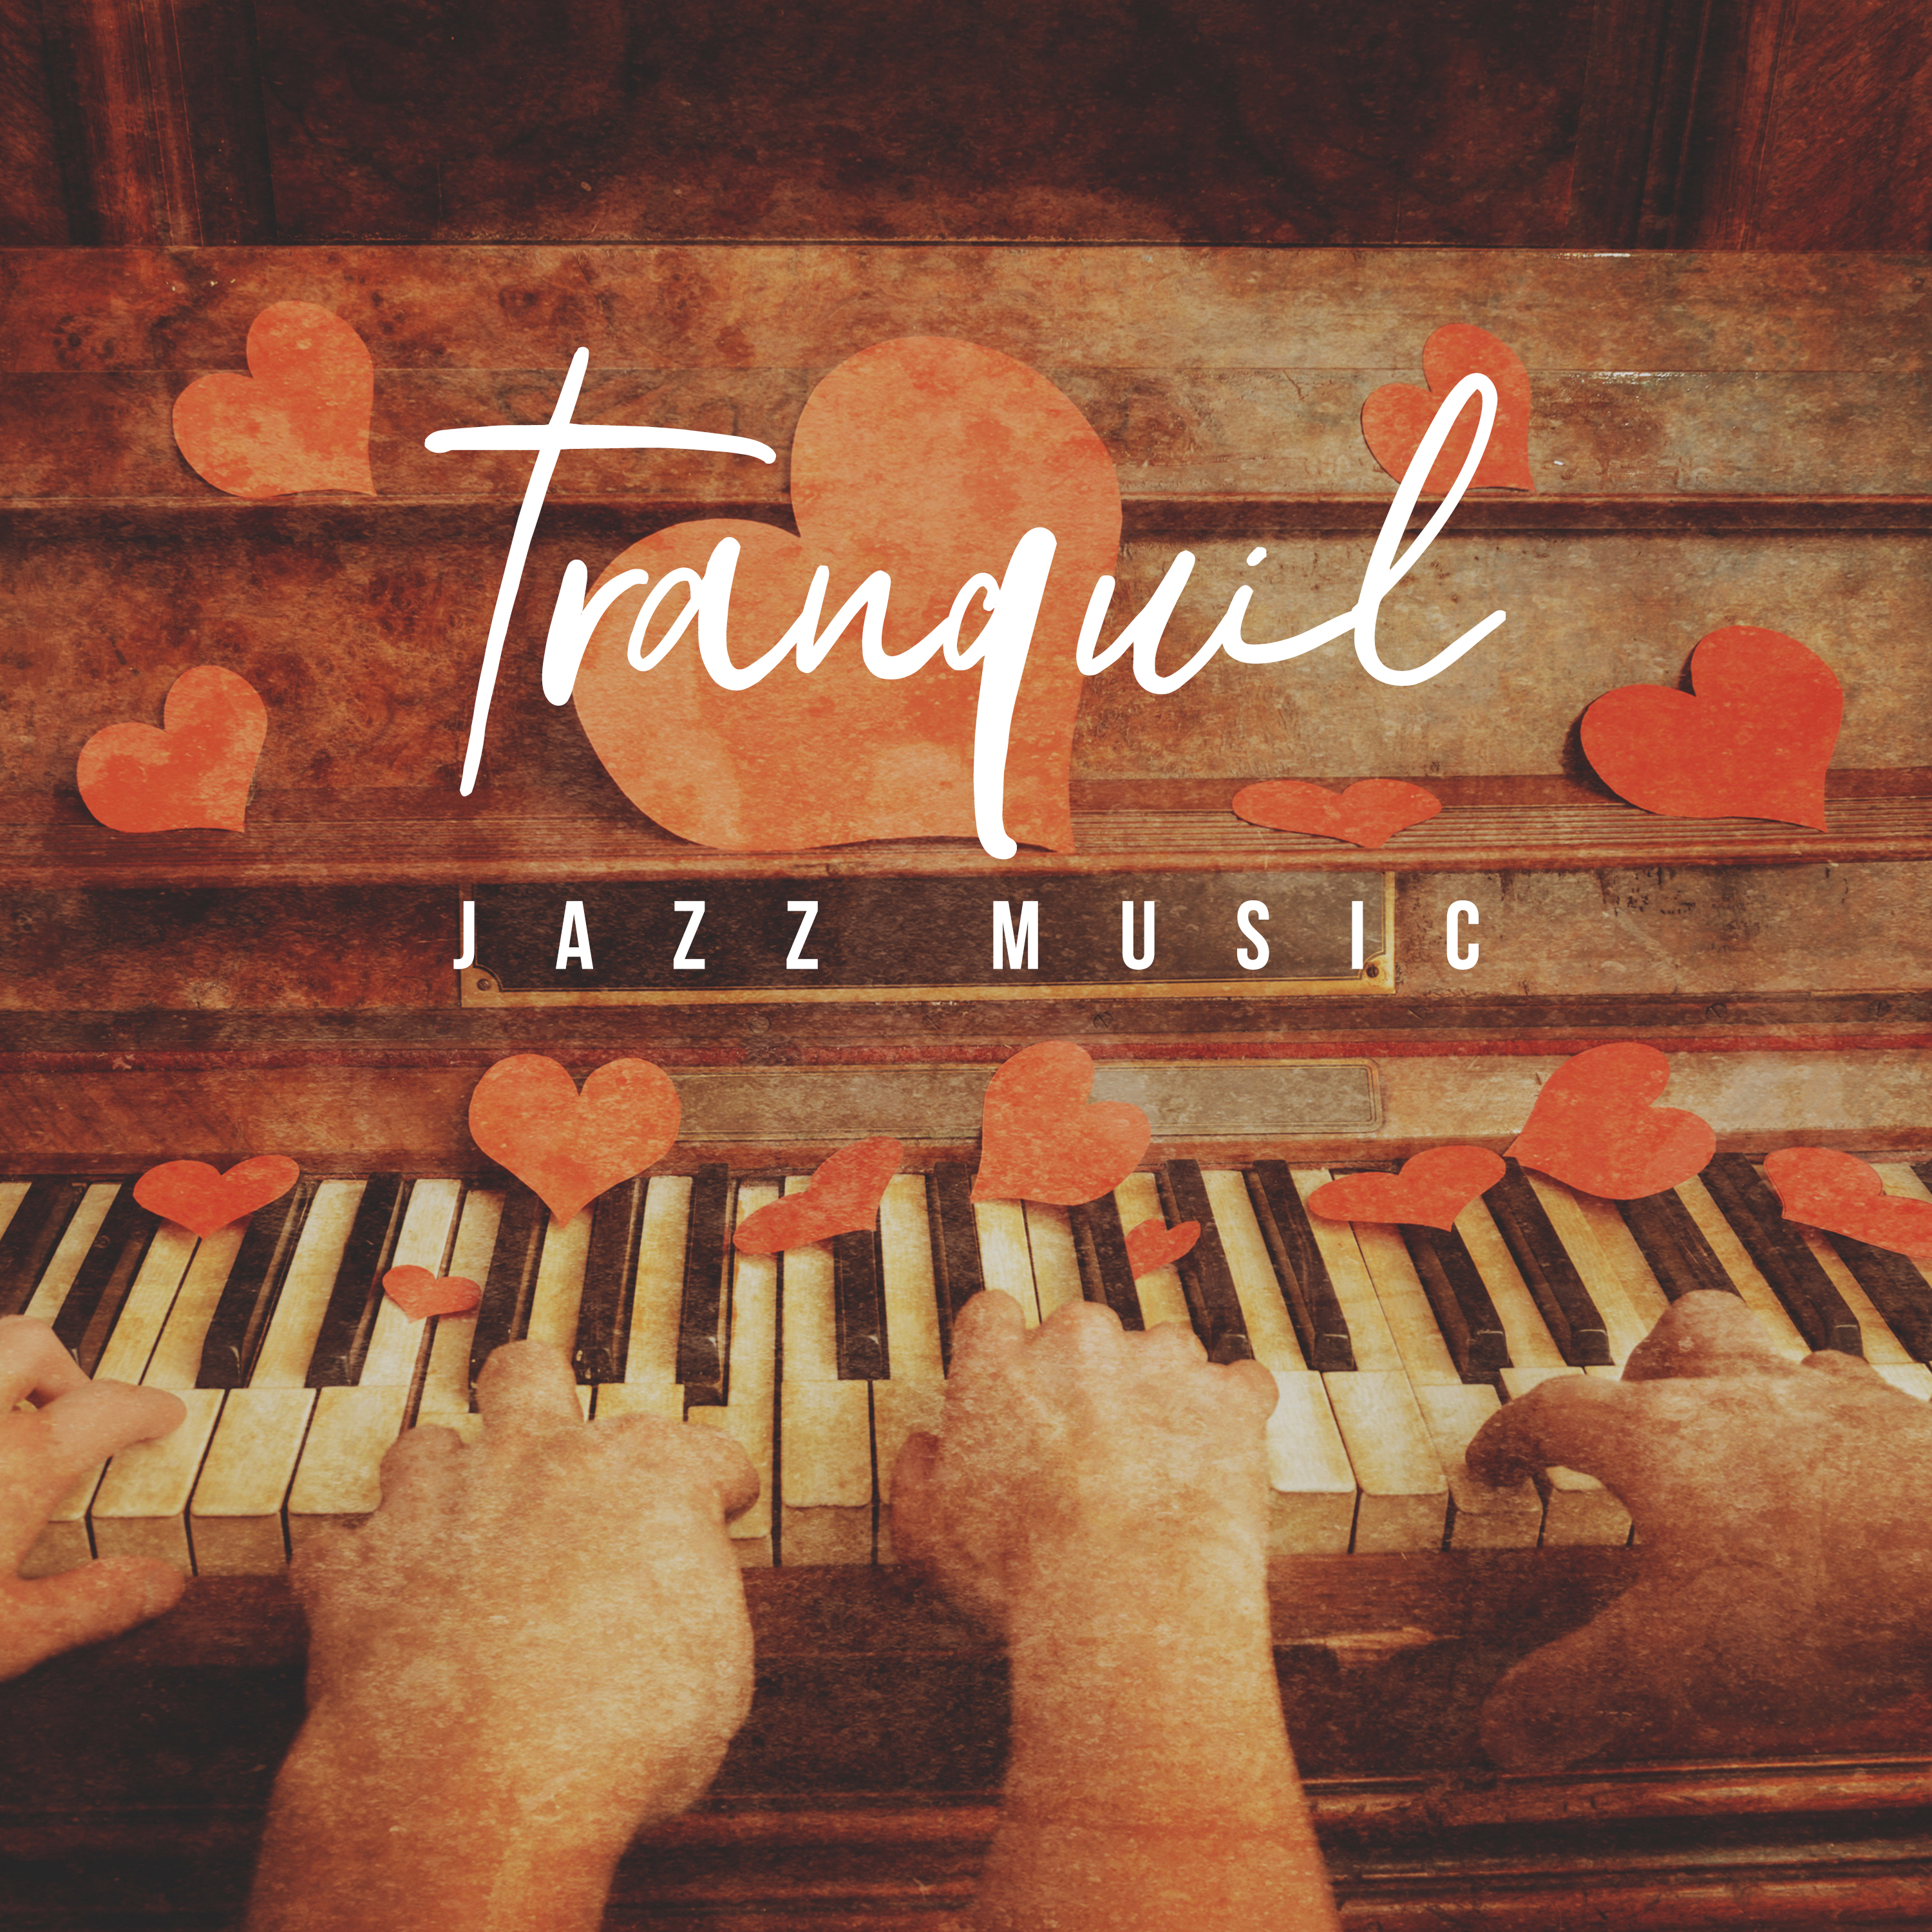 Tranquil Jazz Music (Peaceful Piano & Romantic Background Music, Best Emotional Love Songs, Deep Relax & Chill Jazz)